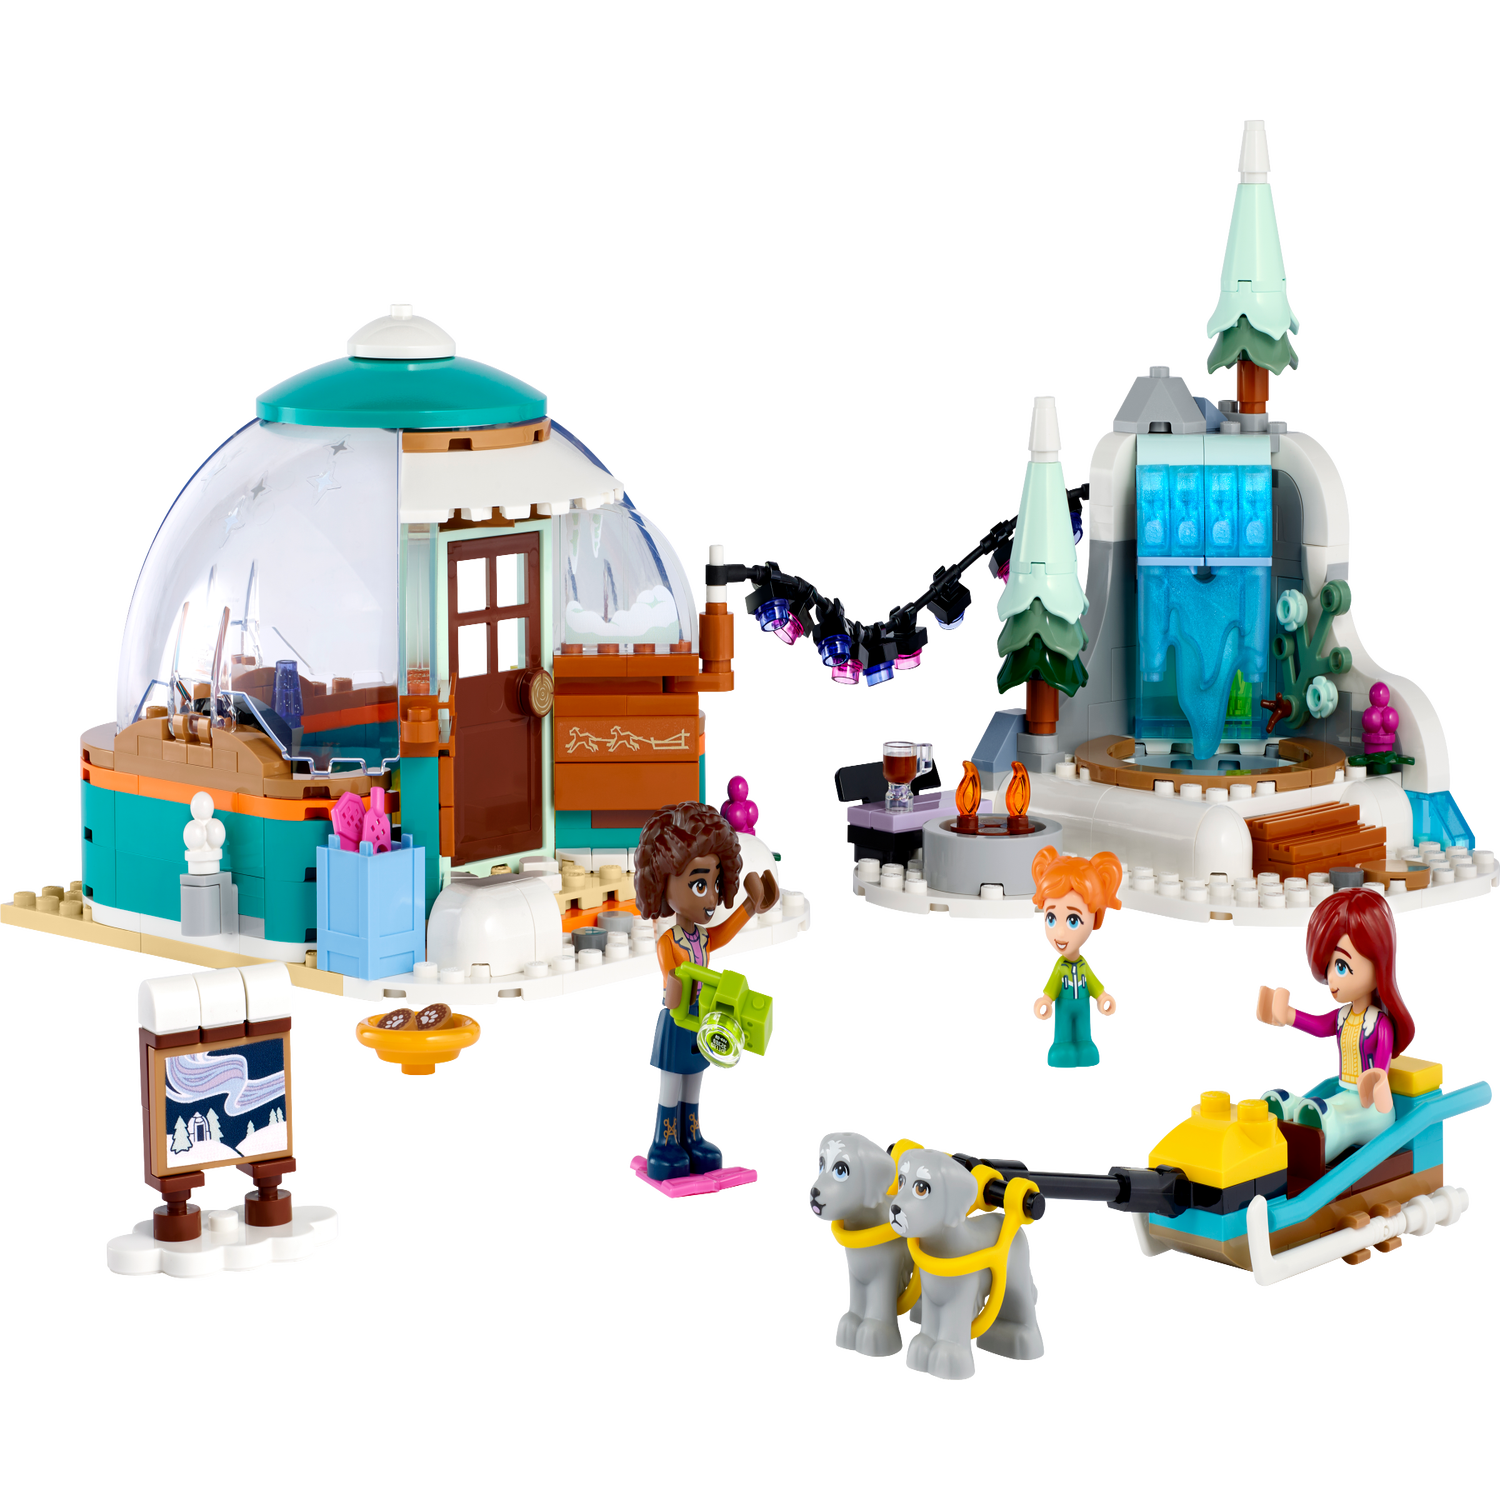 The Adventure Is Building: LEGO® Fortnite is Live! - About Us